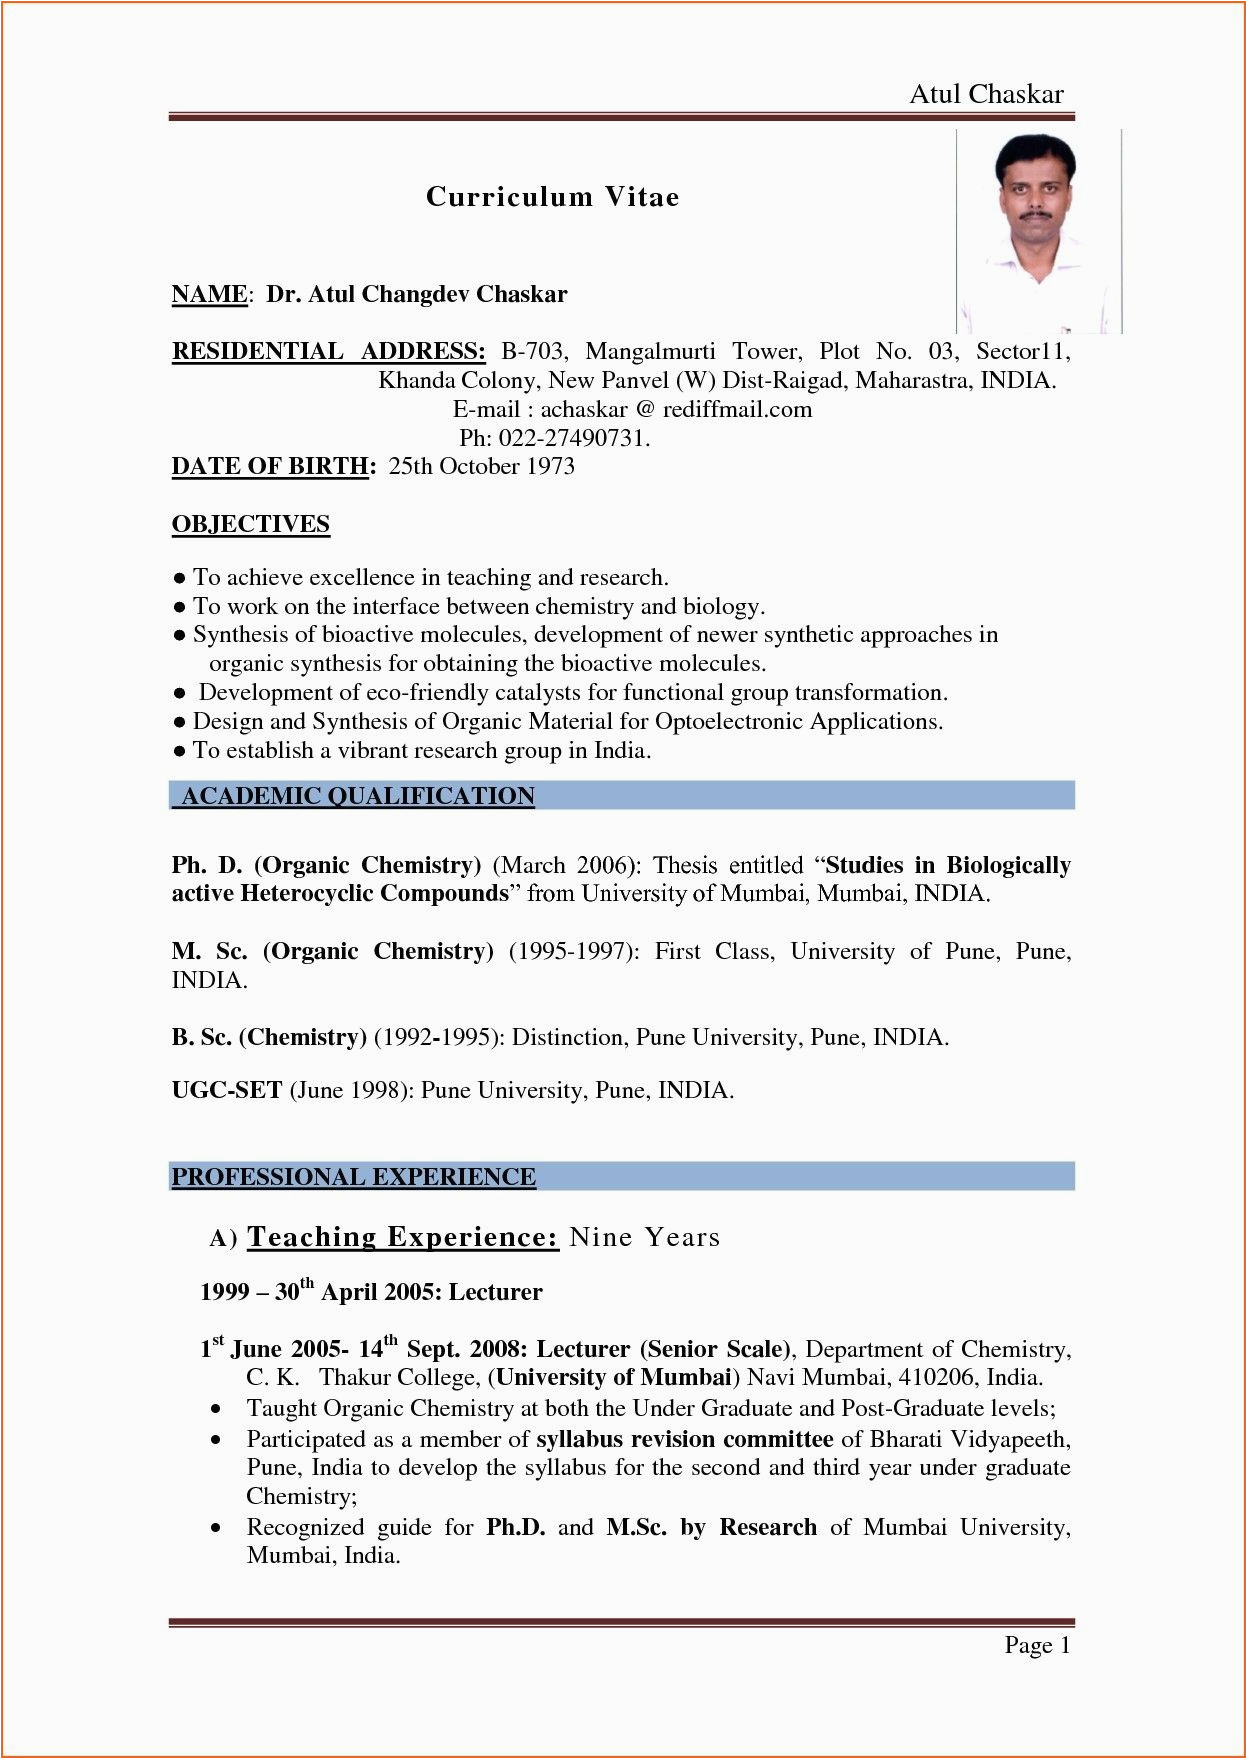 Sample Resume for Primary Teachers In India Cv Samples for Teachers In India 15 top Teacher Resume Examples